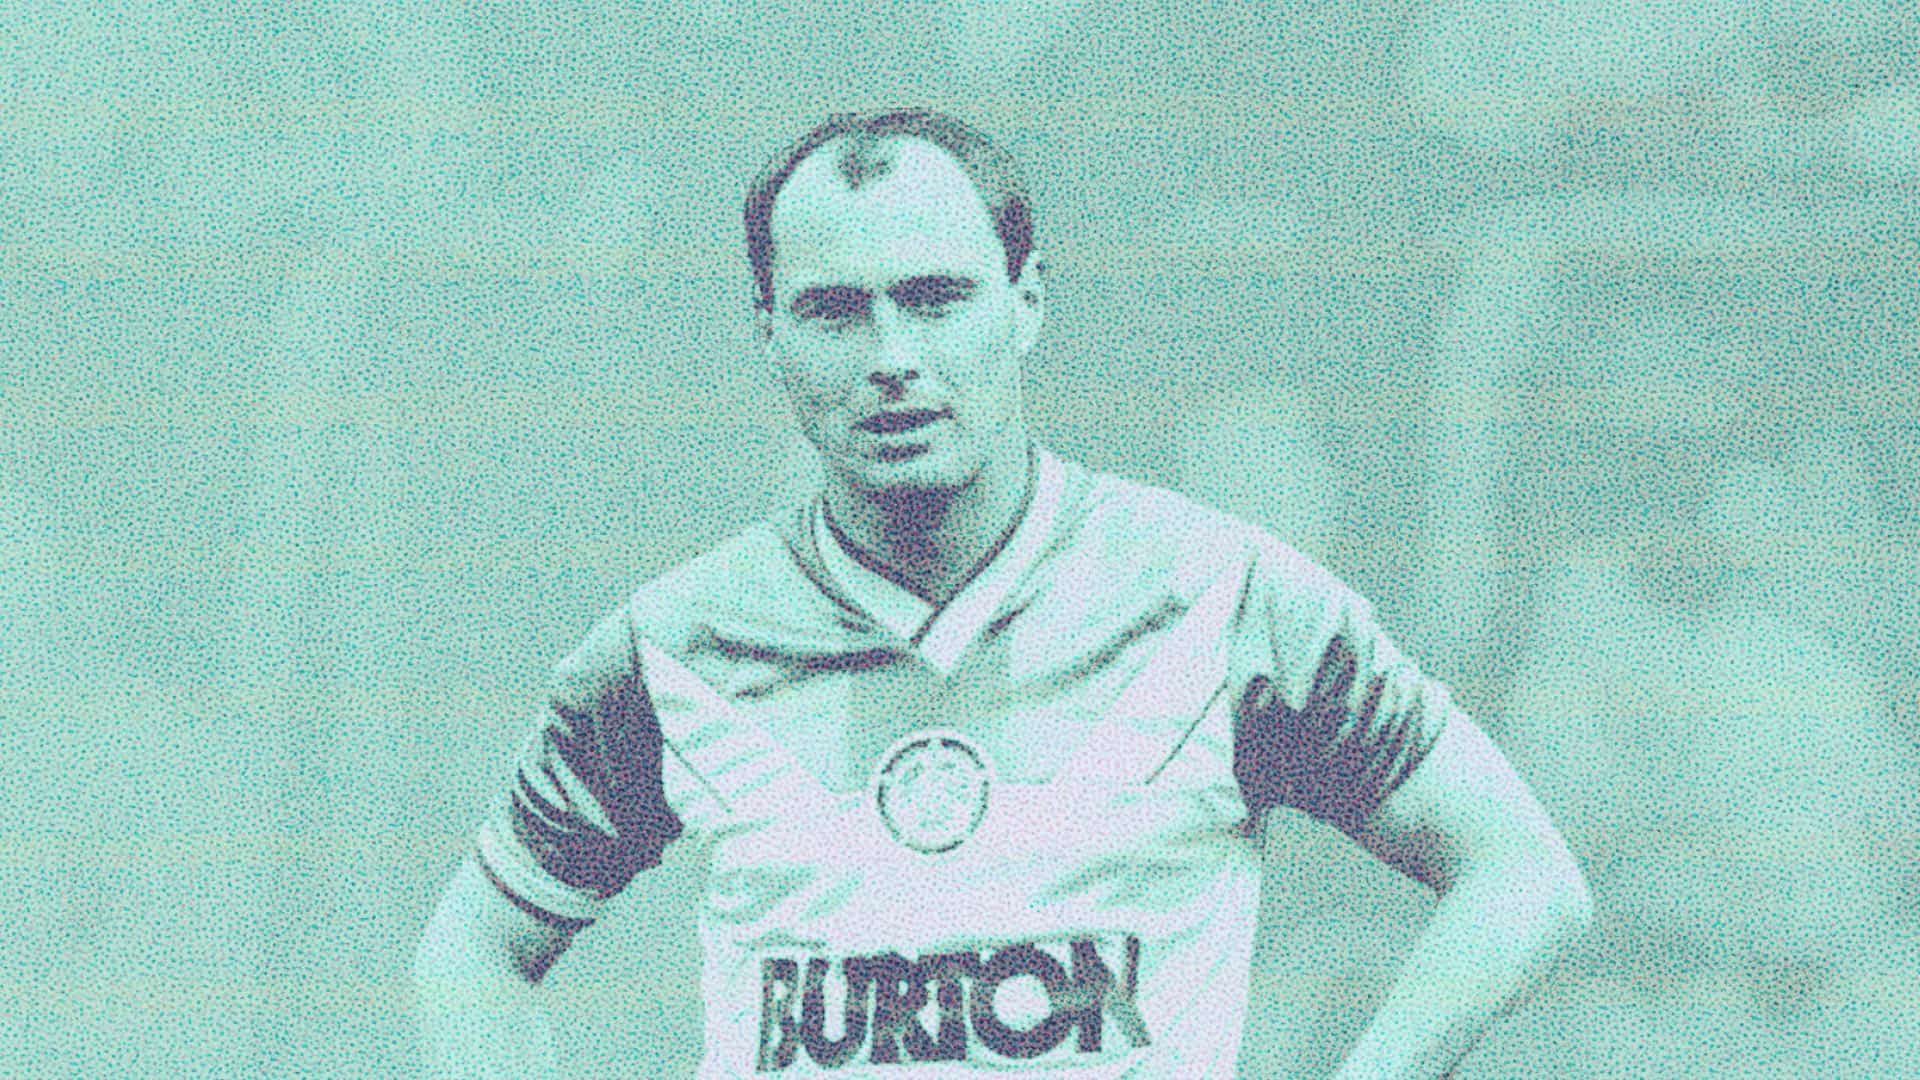 A rare image of 80's left-back Bobby McDonald in one of his eighteen appearances for Leeds, wearing the classic yellow and blue Burton away shirt